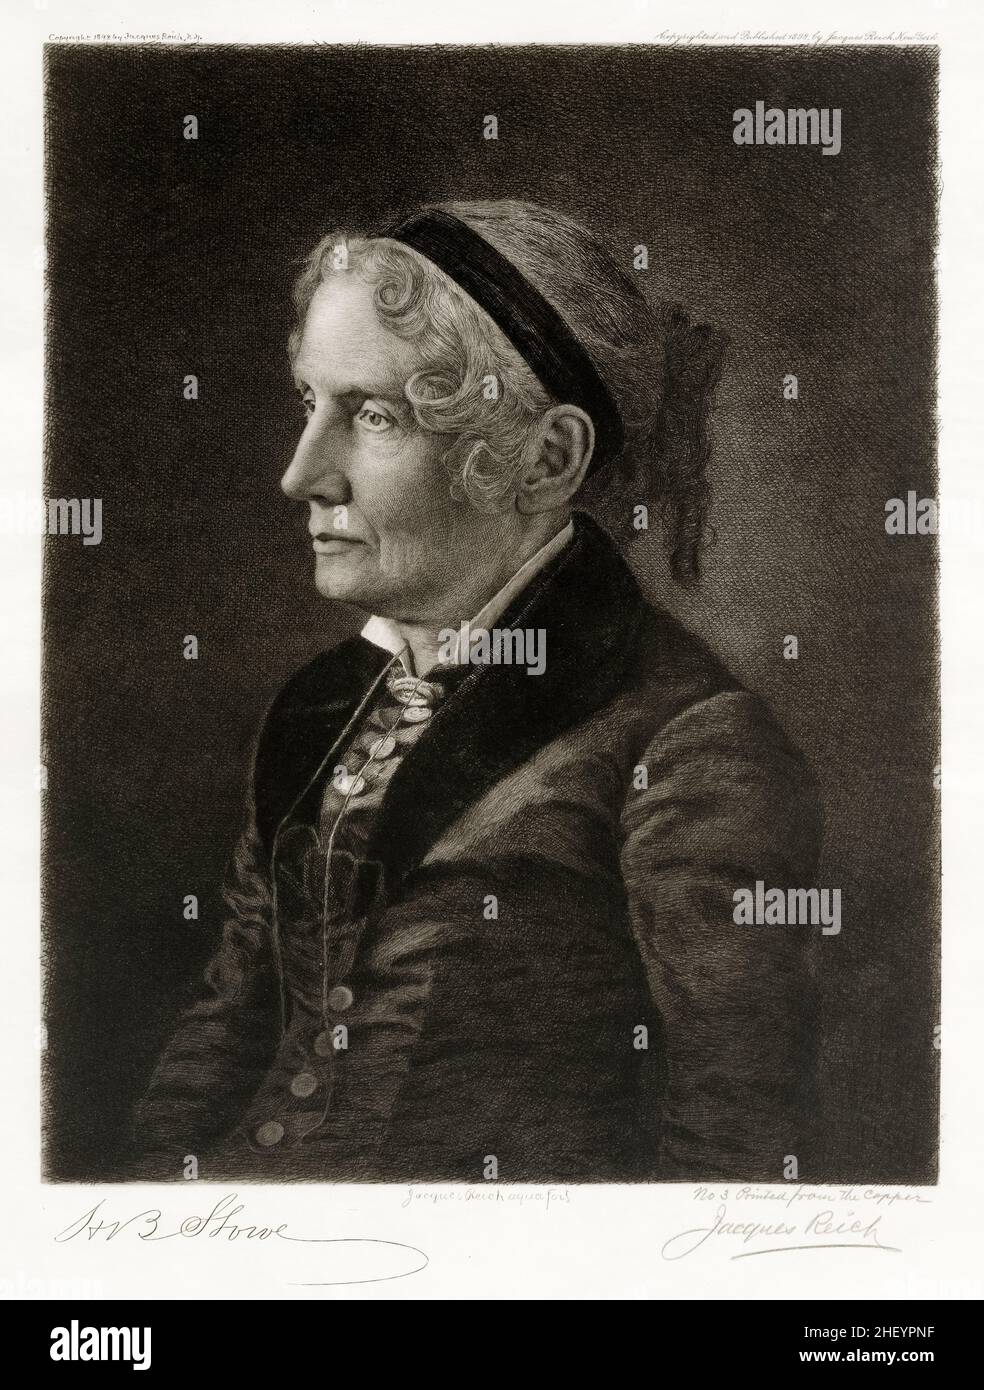 Harriet Beecher Stowe (1811-1896), novelist and slave trade abolitionist, portrait engraving by Jacques Reich, 1898 Stock Photo